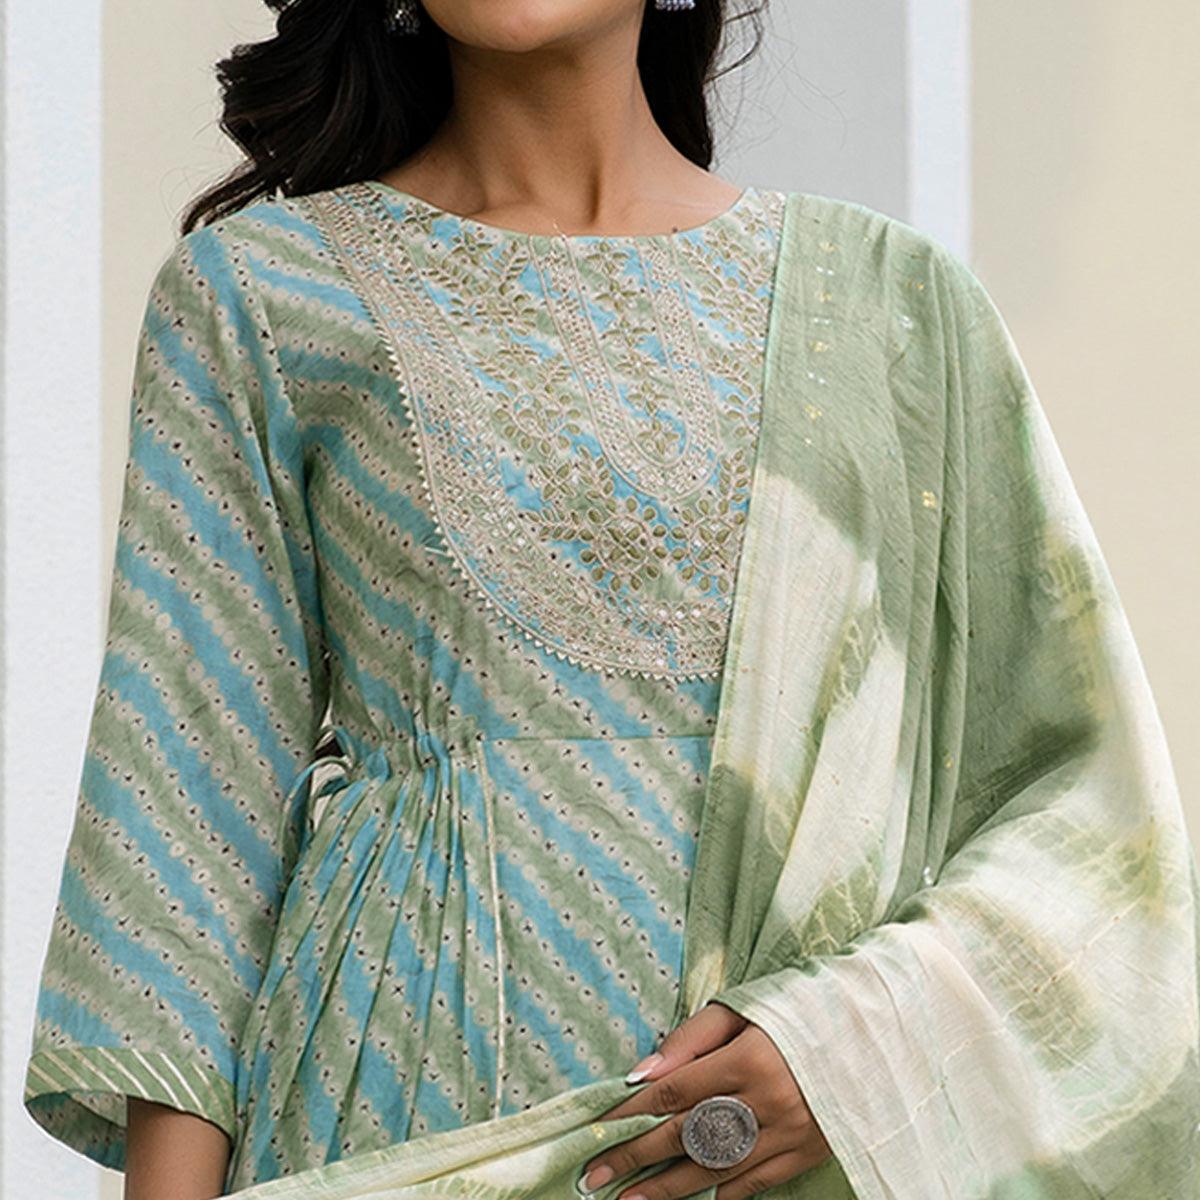 Pista Green Printed With Embroidered Chanderi Sharara Suit - Peachmode